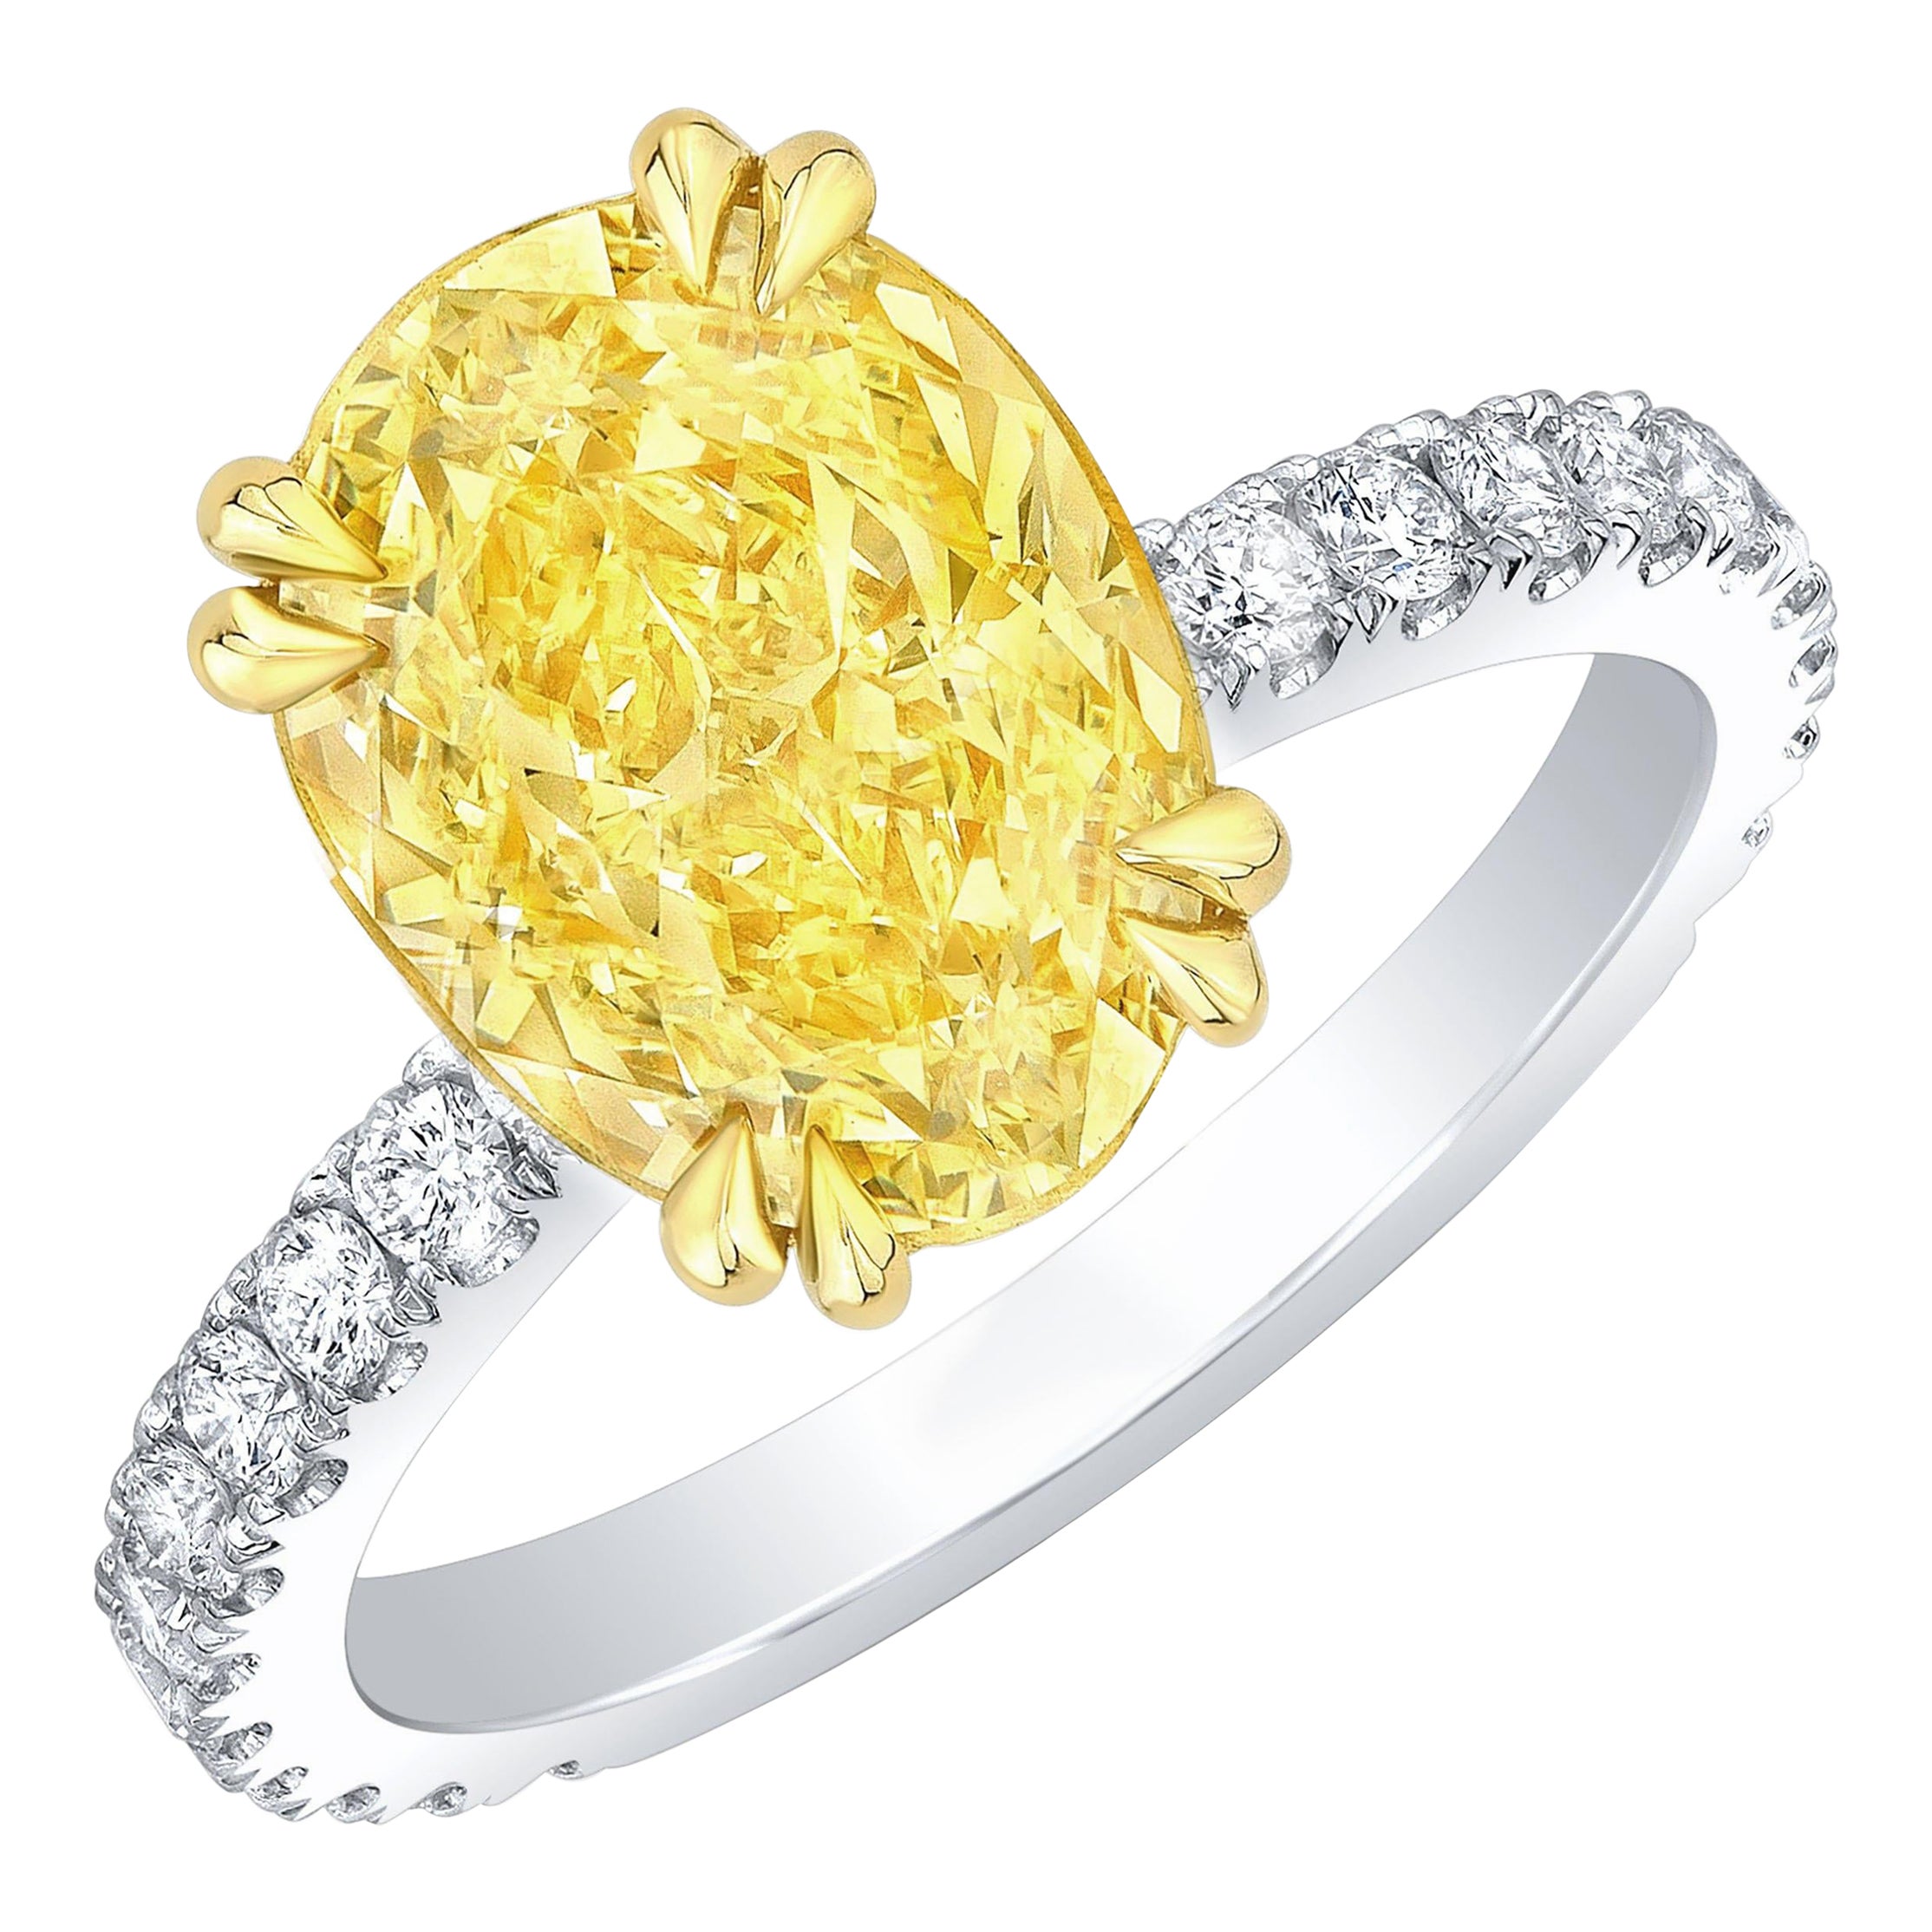 2.90ct Canary Fancy Light Yellow Oval Hidden Halo Engagement Ring VVS1 GIA For Sale 1stDibs | light canary yellow